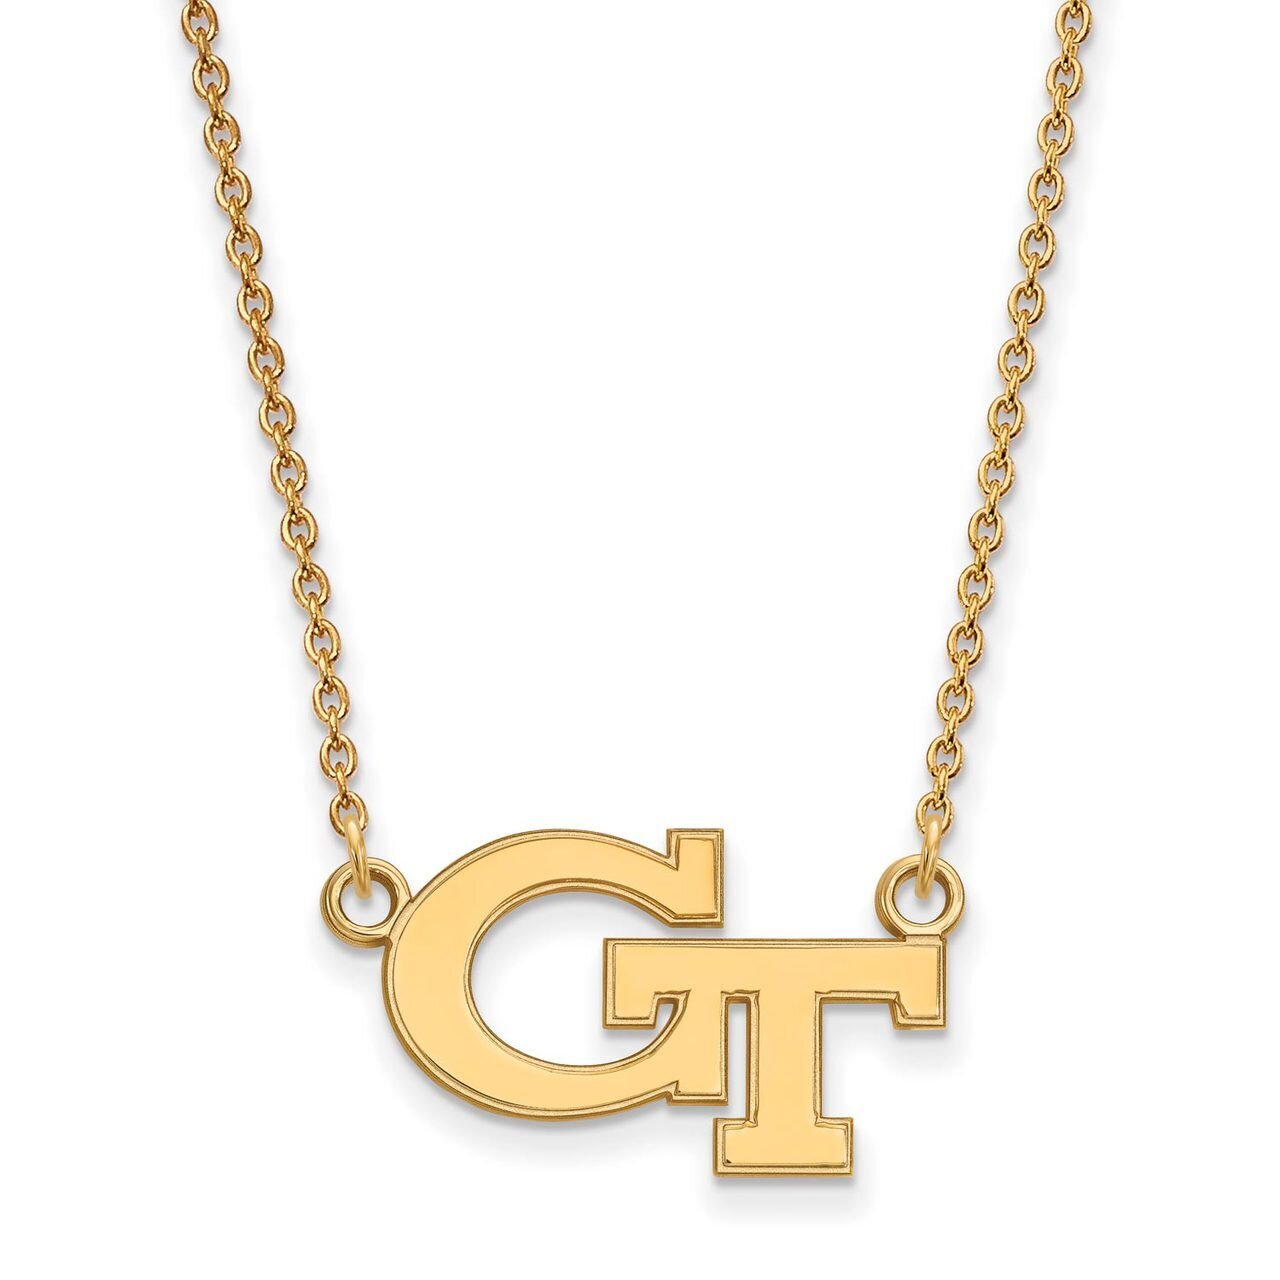 Georgia Institute of Technology Small Pendant with Chain Necklace 14k Yellow Gold 4Y009GT-18